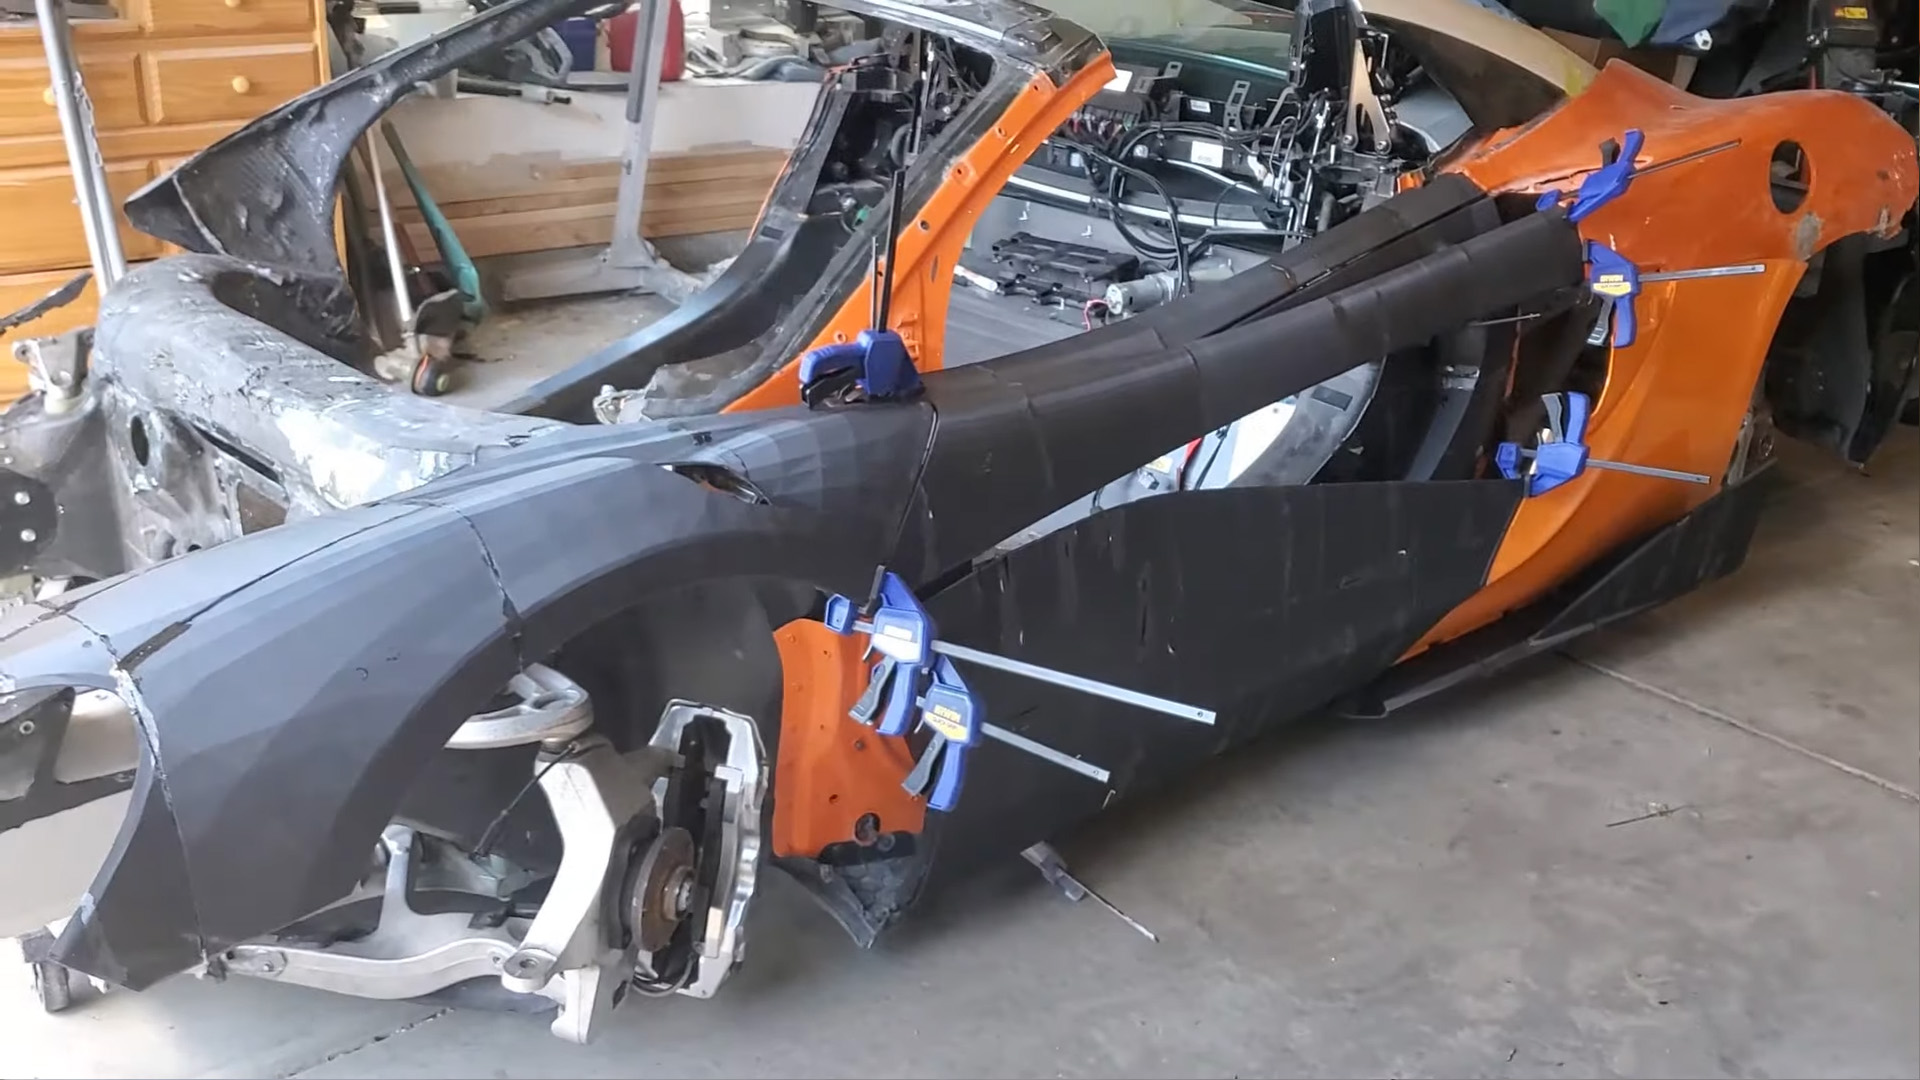 Can 3D Printing Save This Destroyed McLaren 600LT? One Guy Is Finding Out